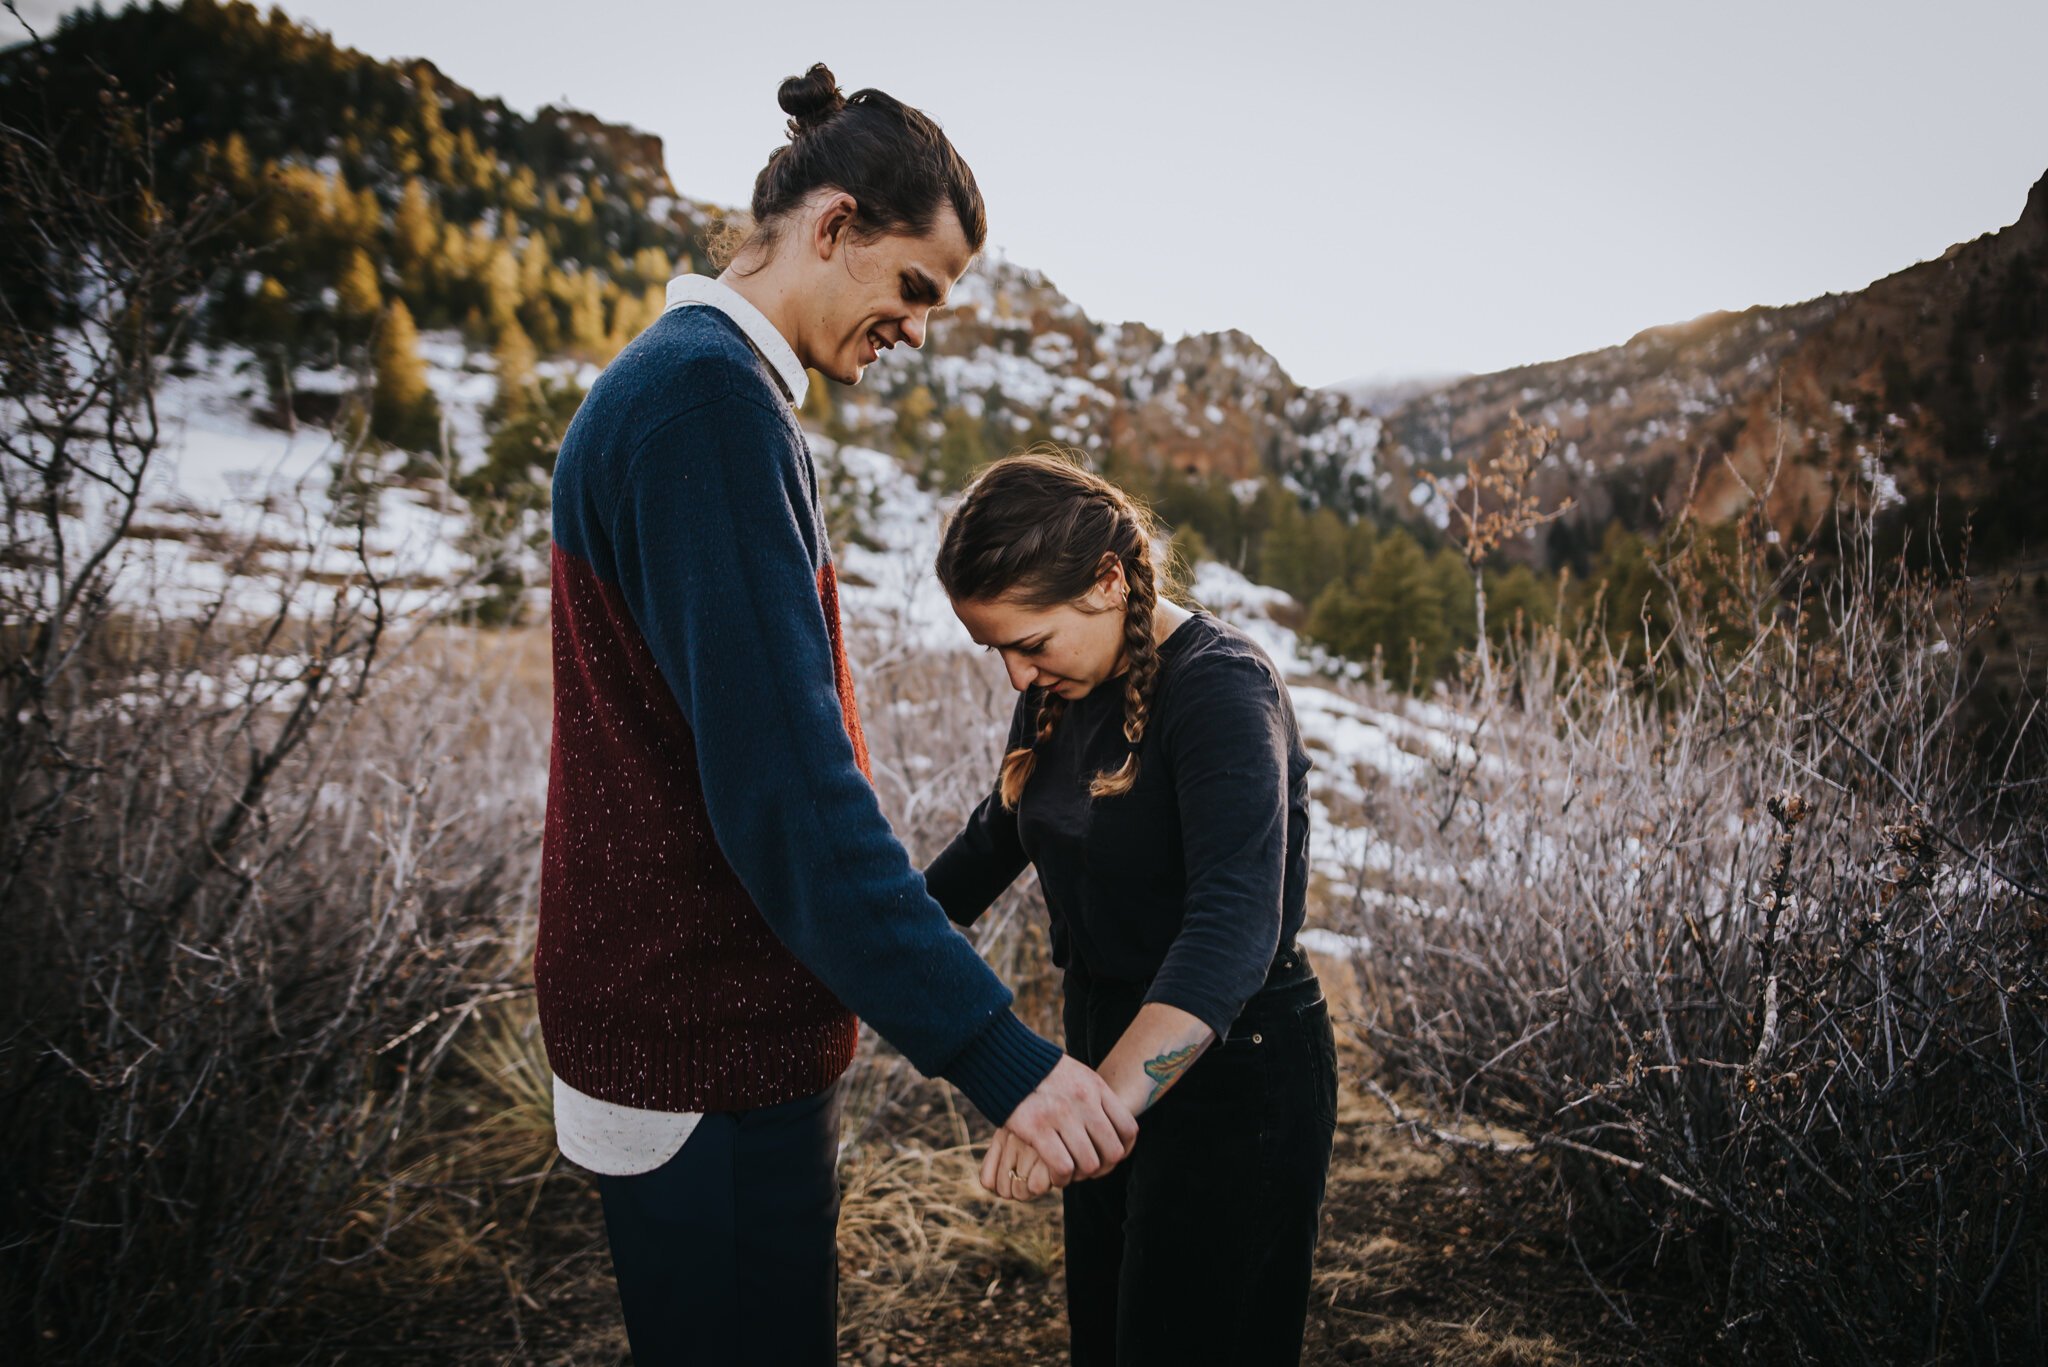 Yulia+and+Logan+Couples+Session+Colorado+Springs+Colorado+Sunset+Cheyenne+Canyon+Husband+Wife+Wild+Prairie+Photography-06-2020.jpeg